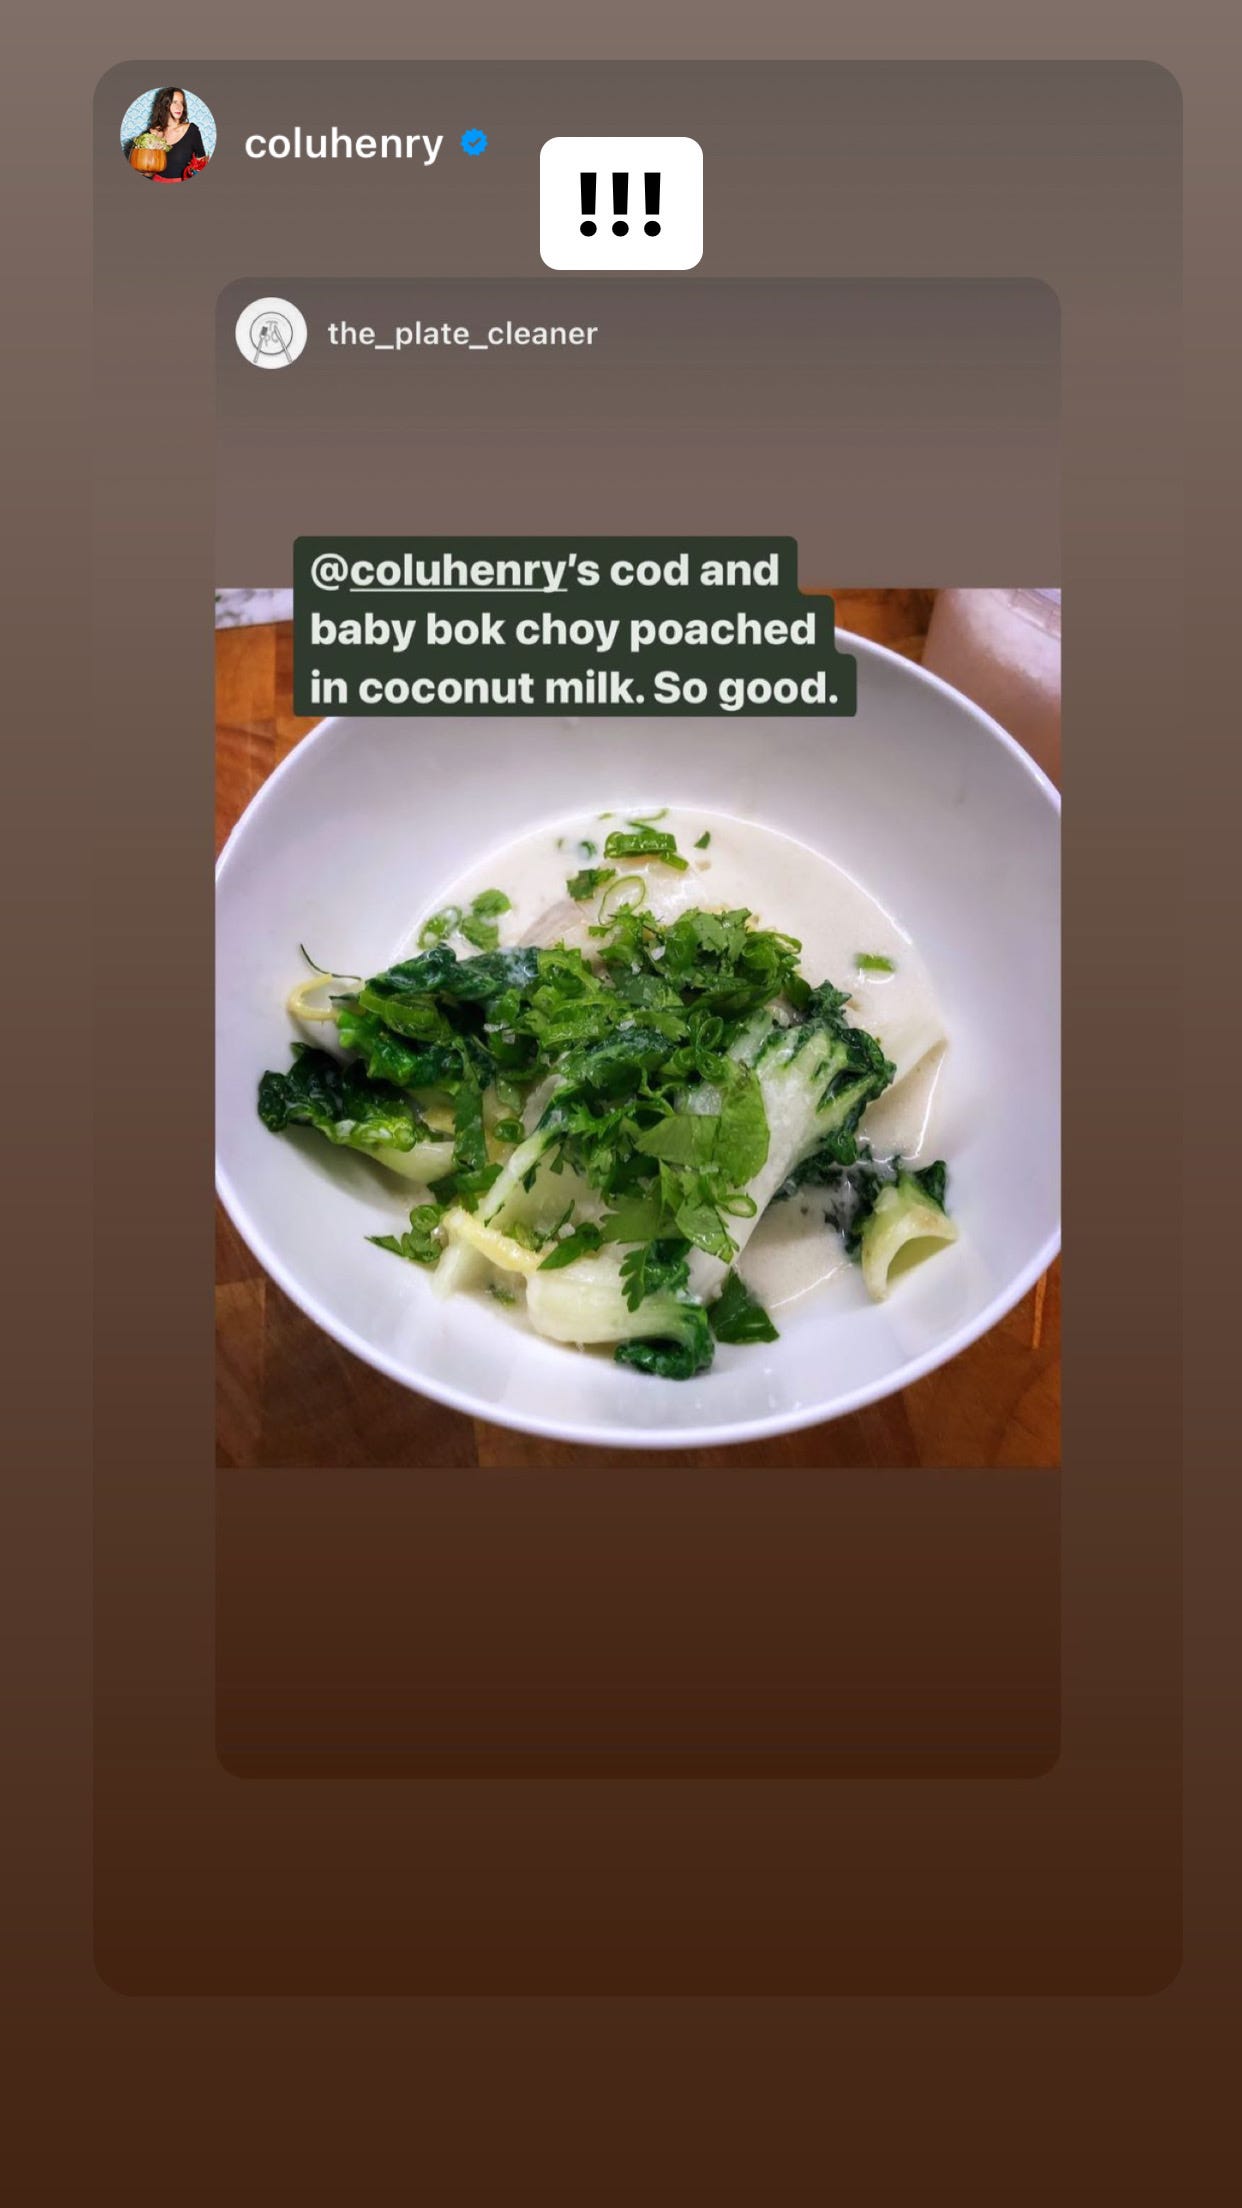 An Instagram story by Colu Henry, sharing an Instagram story by The Plate Cleaner showing a bowl of cod and baby bok choy poached in coconut milk.  There are exclamation points in a caption to express my excitement.